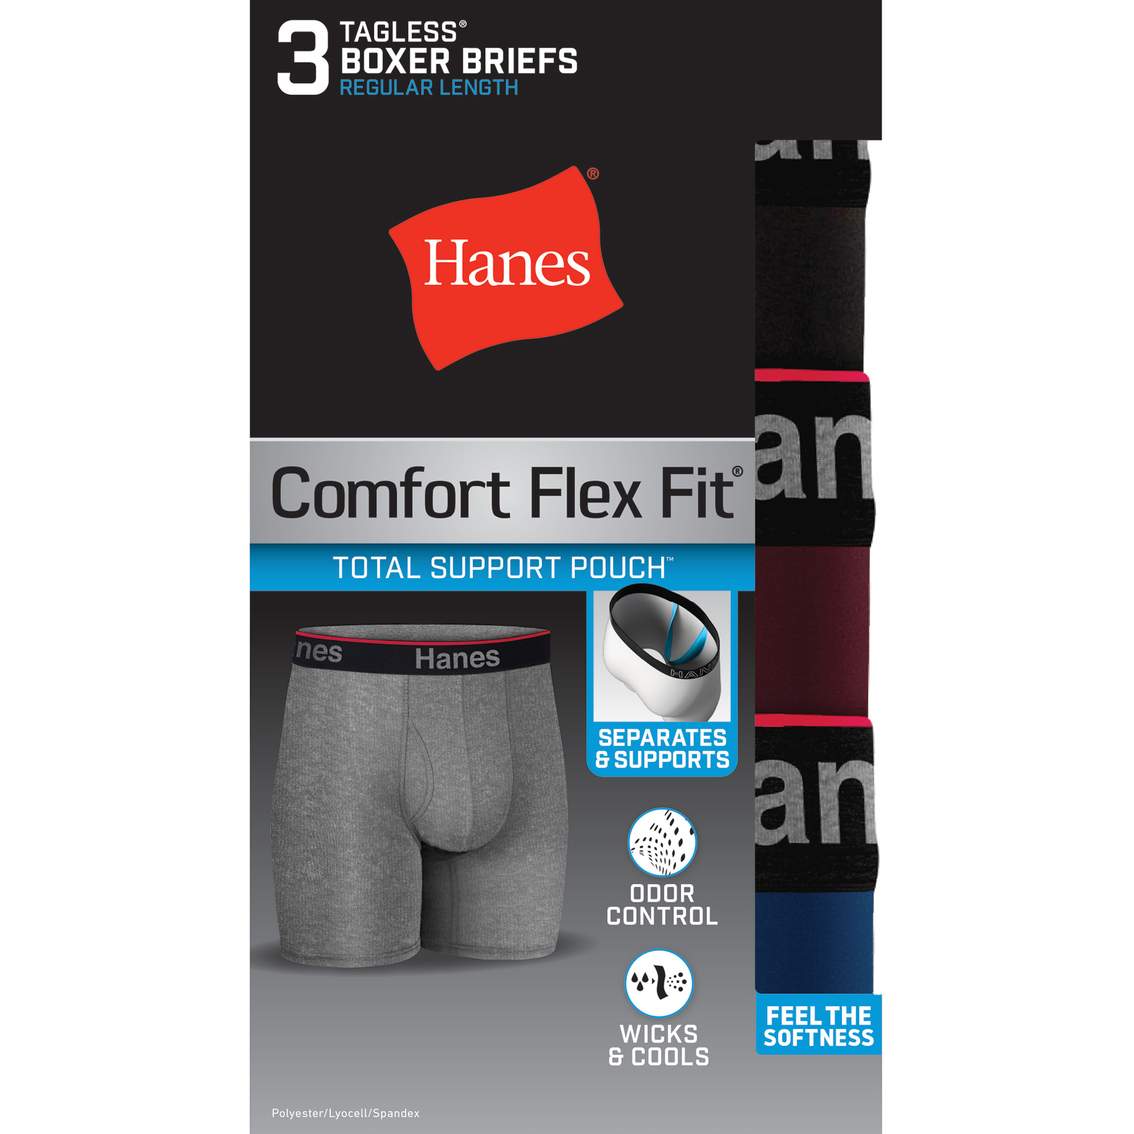 Hanes Comfort Flex Fit Boxer Briefs With Support Pouch 3 Pk